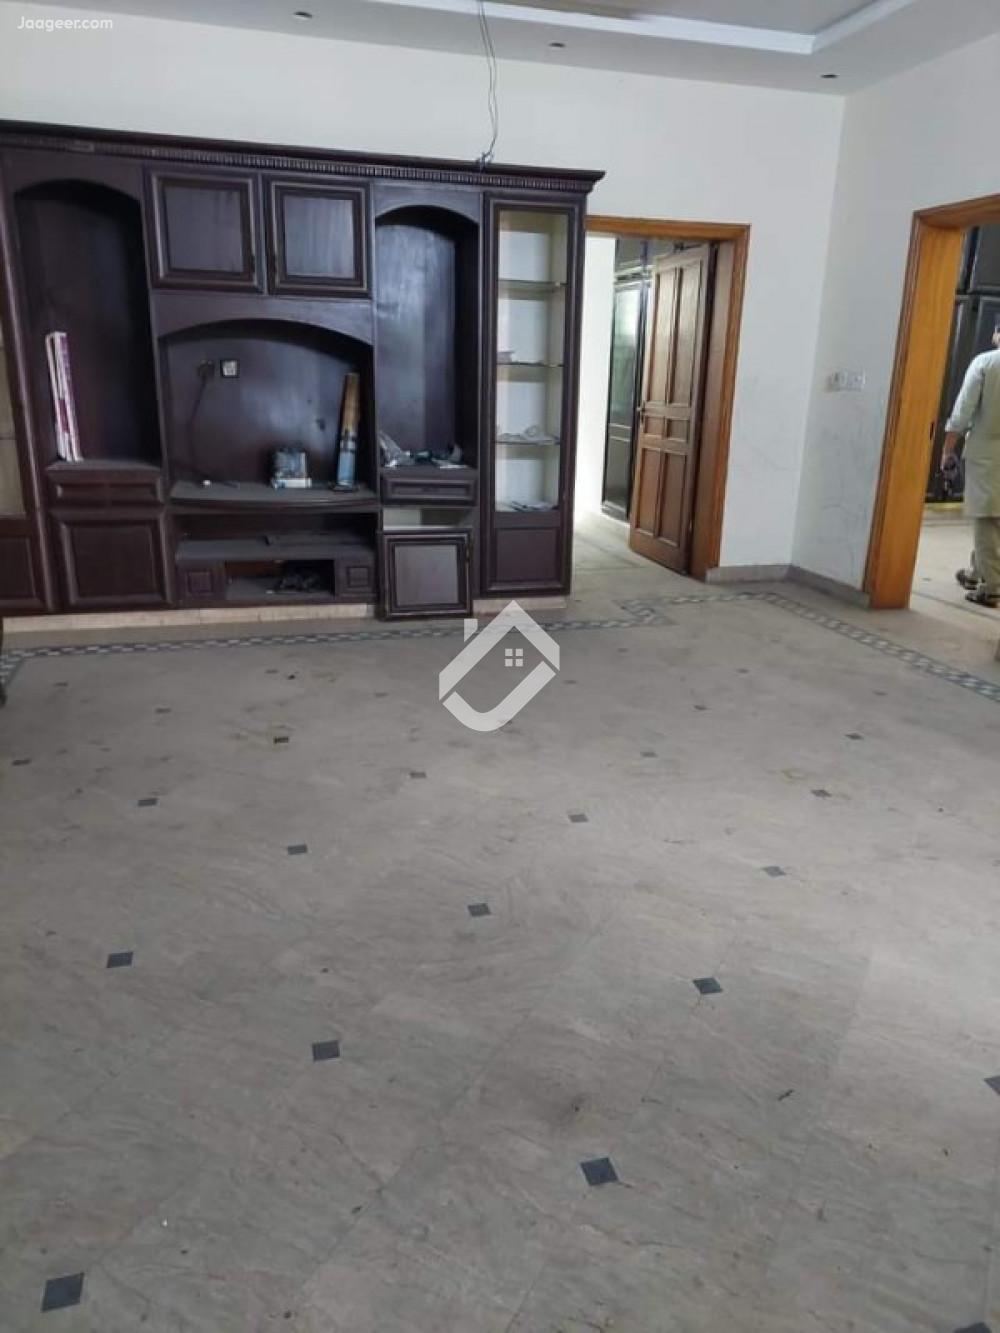 Main image 10 Marla House For Sale In Wapda Town Phase 2  Wapda Town Phase-2, Lahore